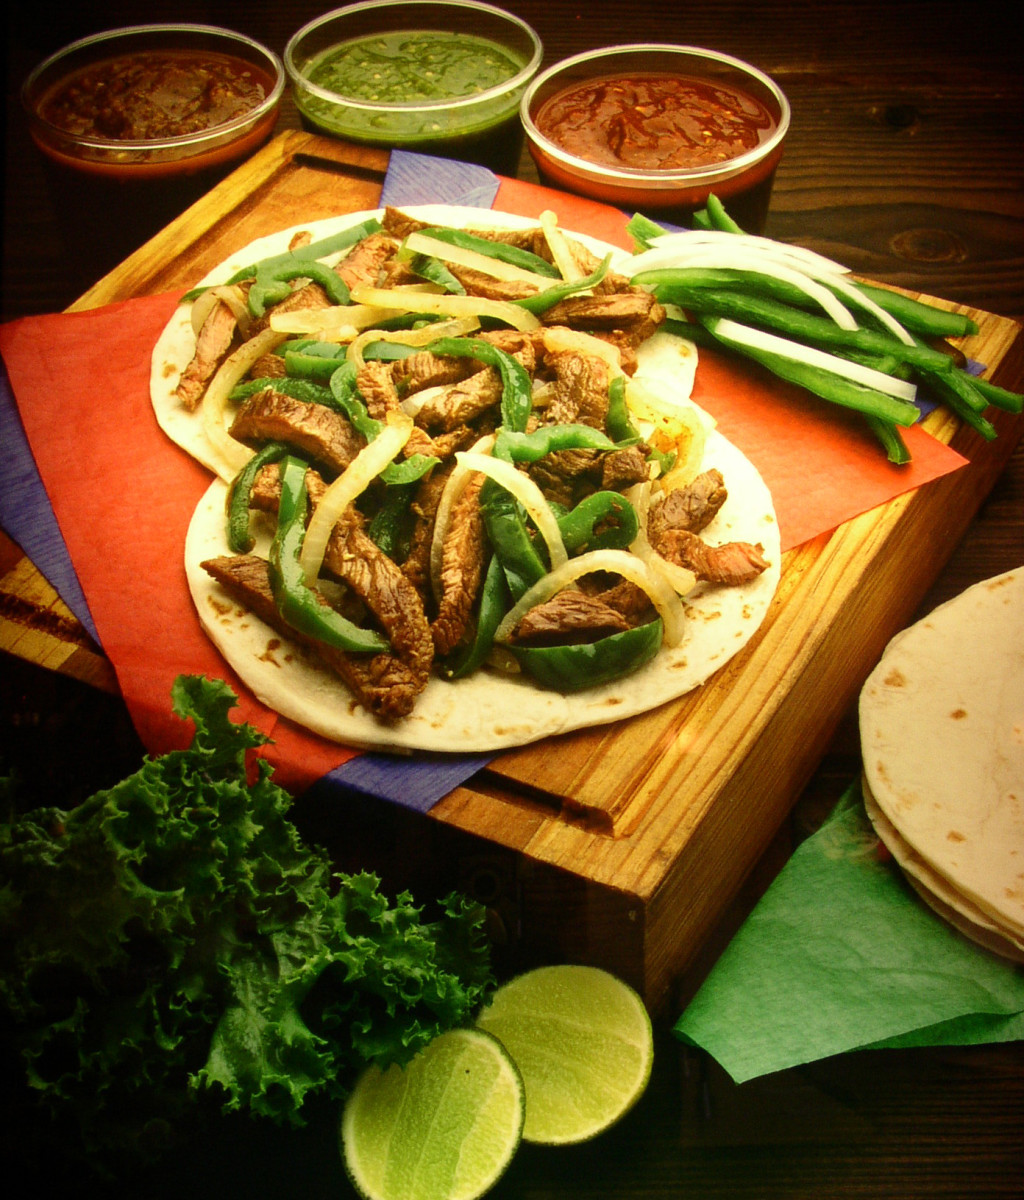 Carne Asada is a Mexican recipe for marinated, grilled beef serves up in tortillas. This is not your Father's Taco. This is a flavorful and delicious meal that is great for any occasion.